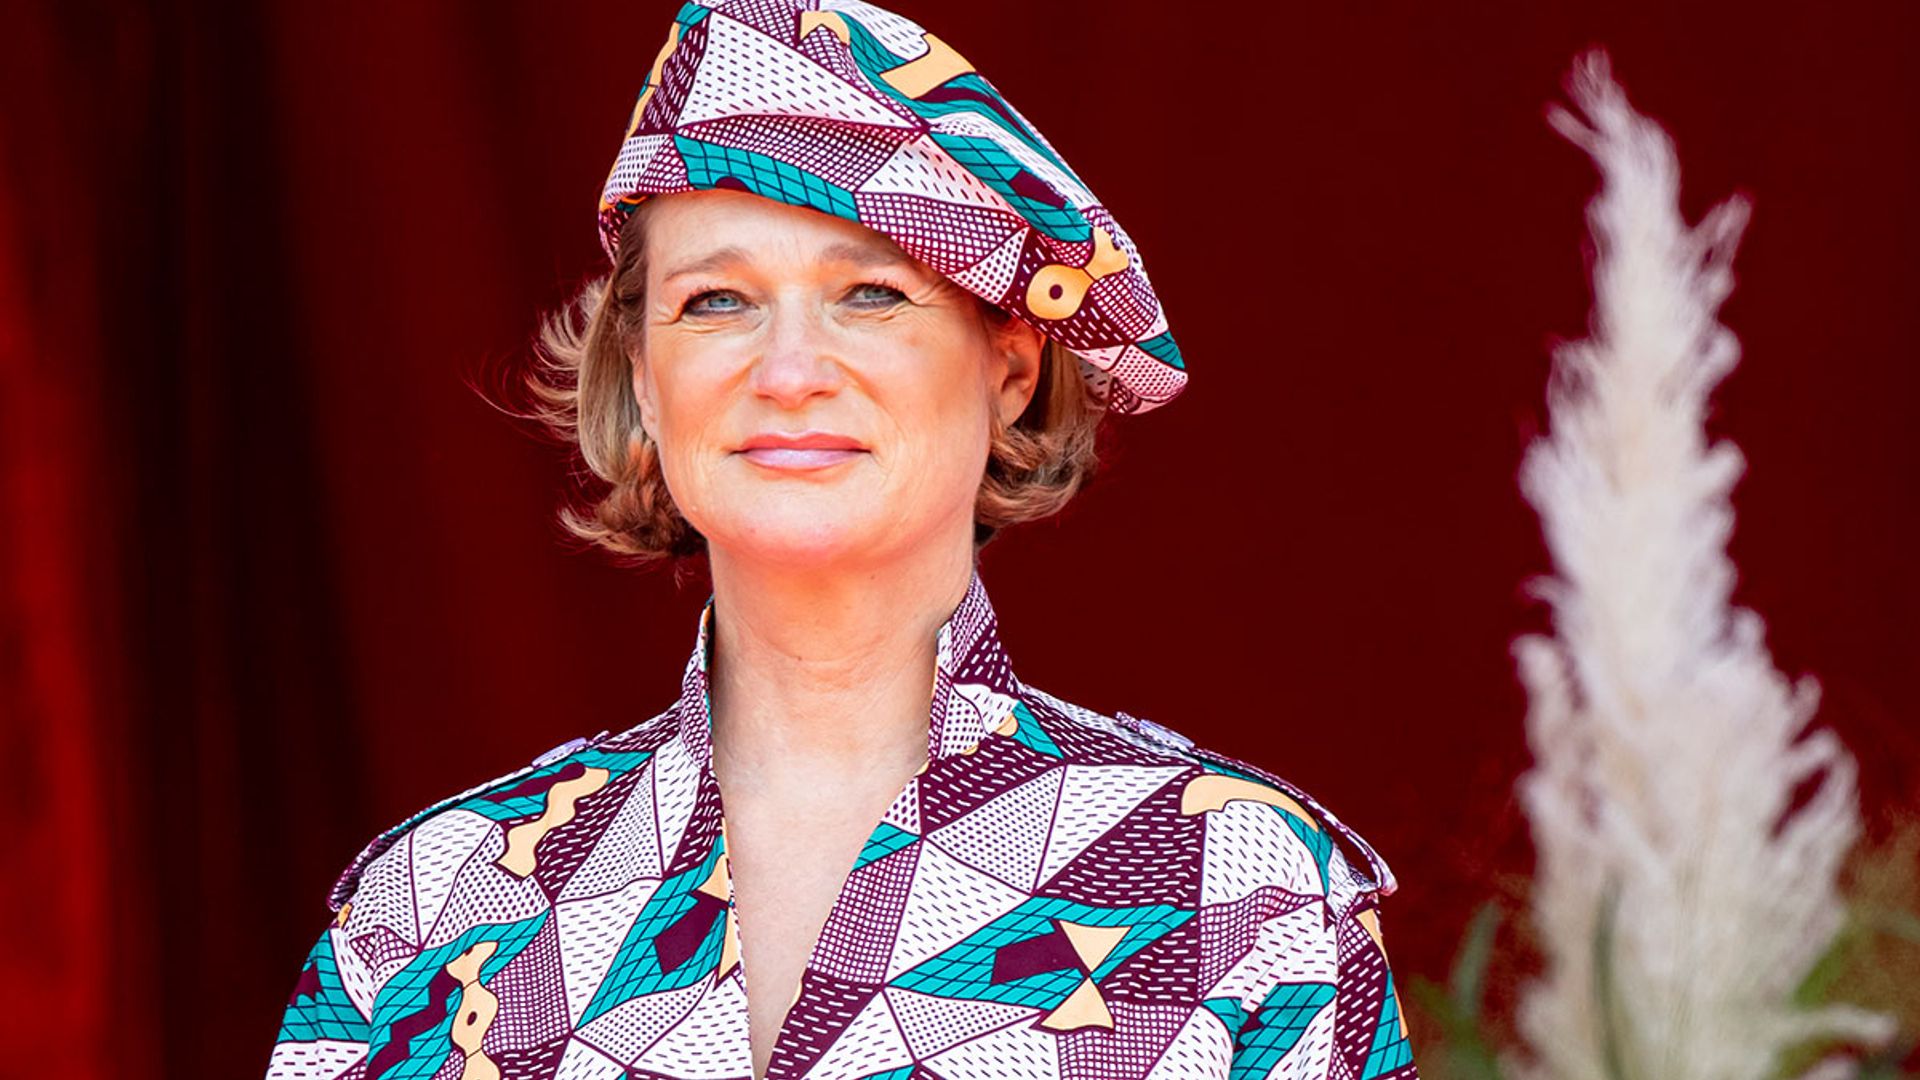 Princess Delphine confirmed to take part in Belgian version of Strictly Come Dancing